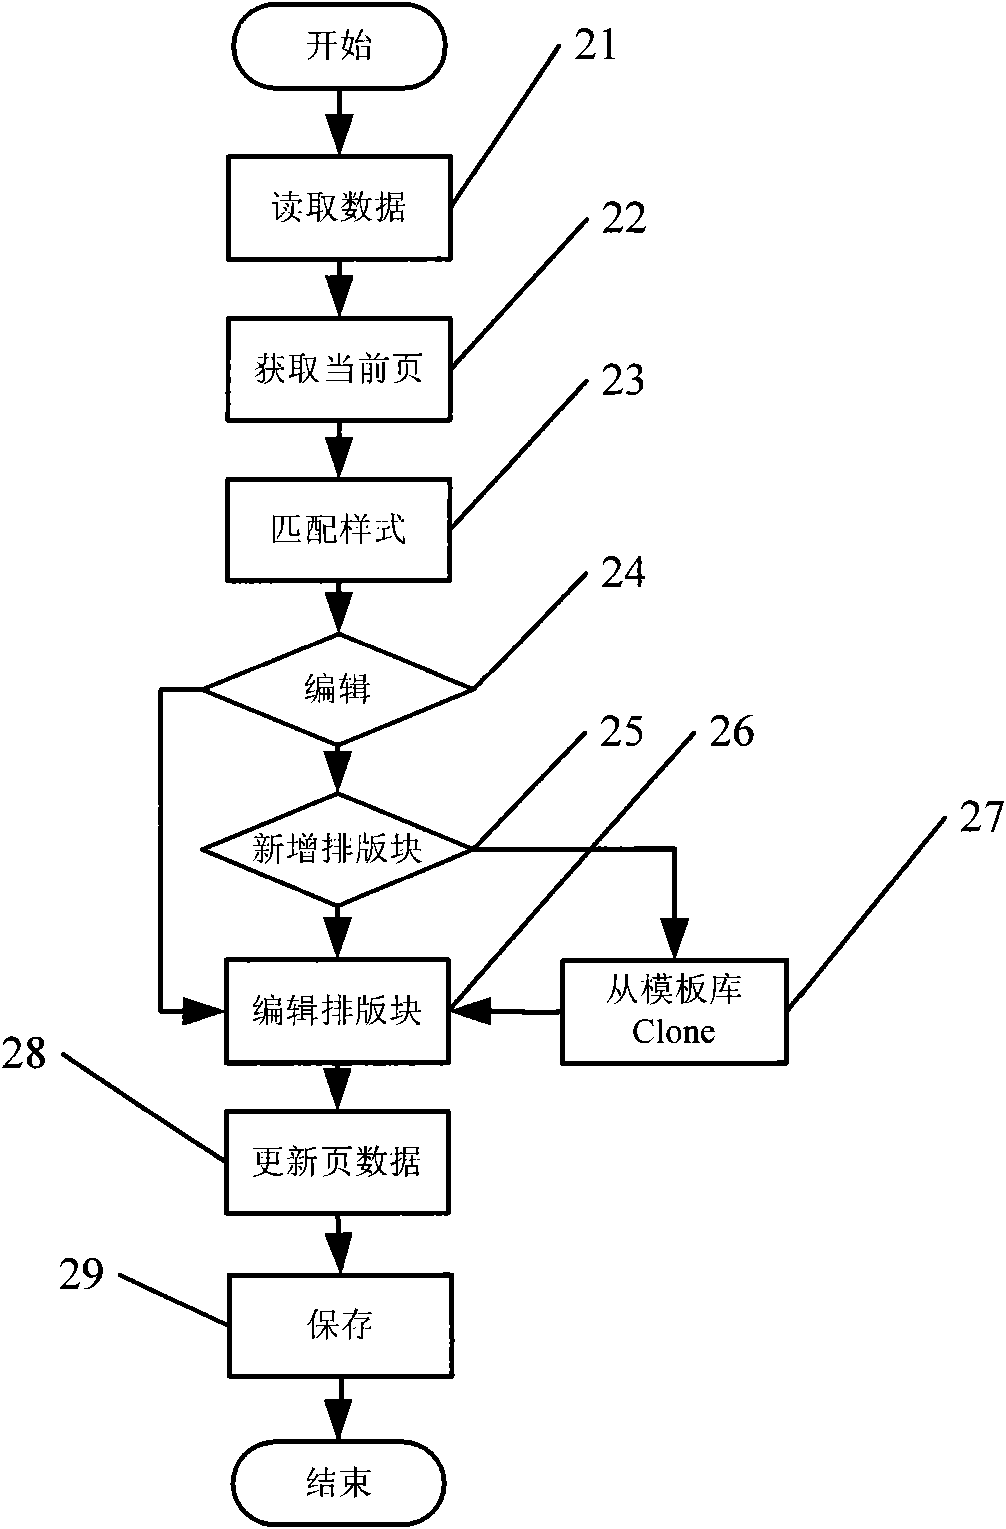 Browser-based system and method for content edition and issue